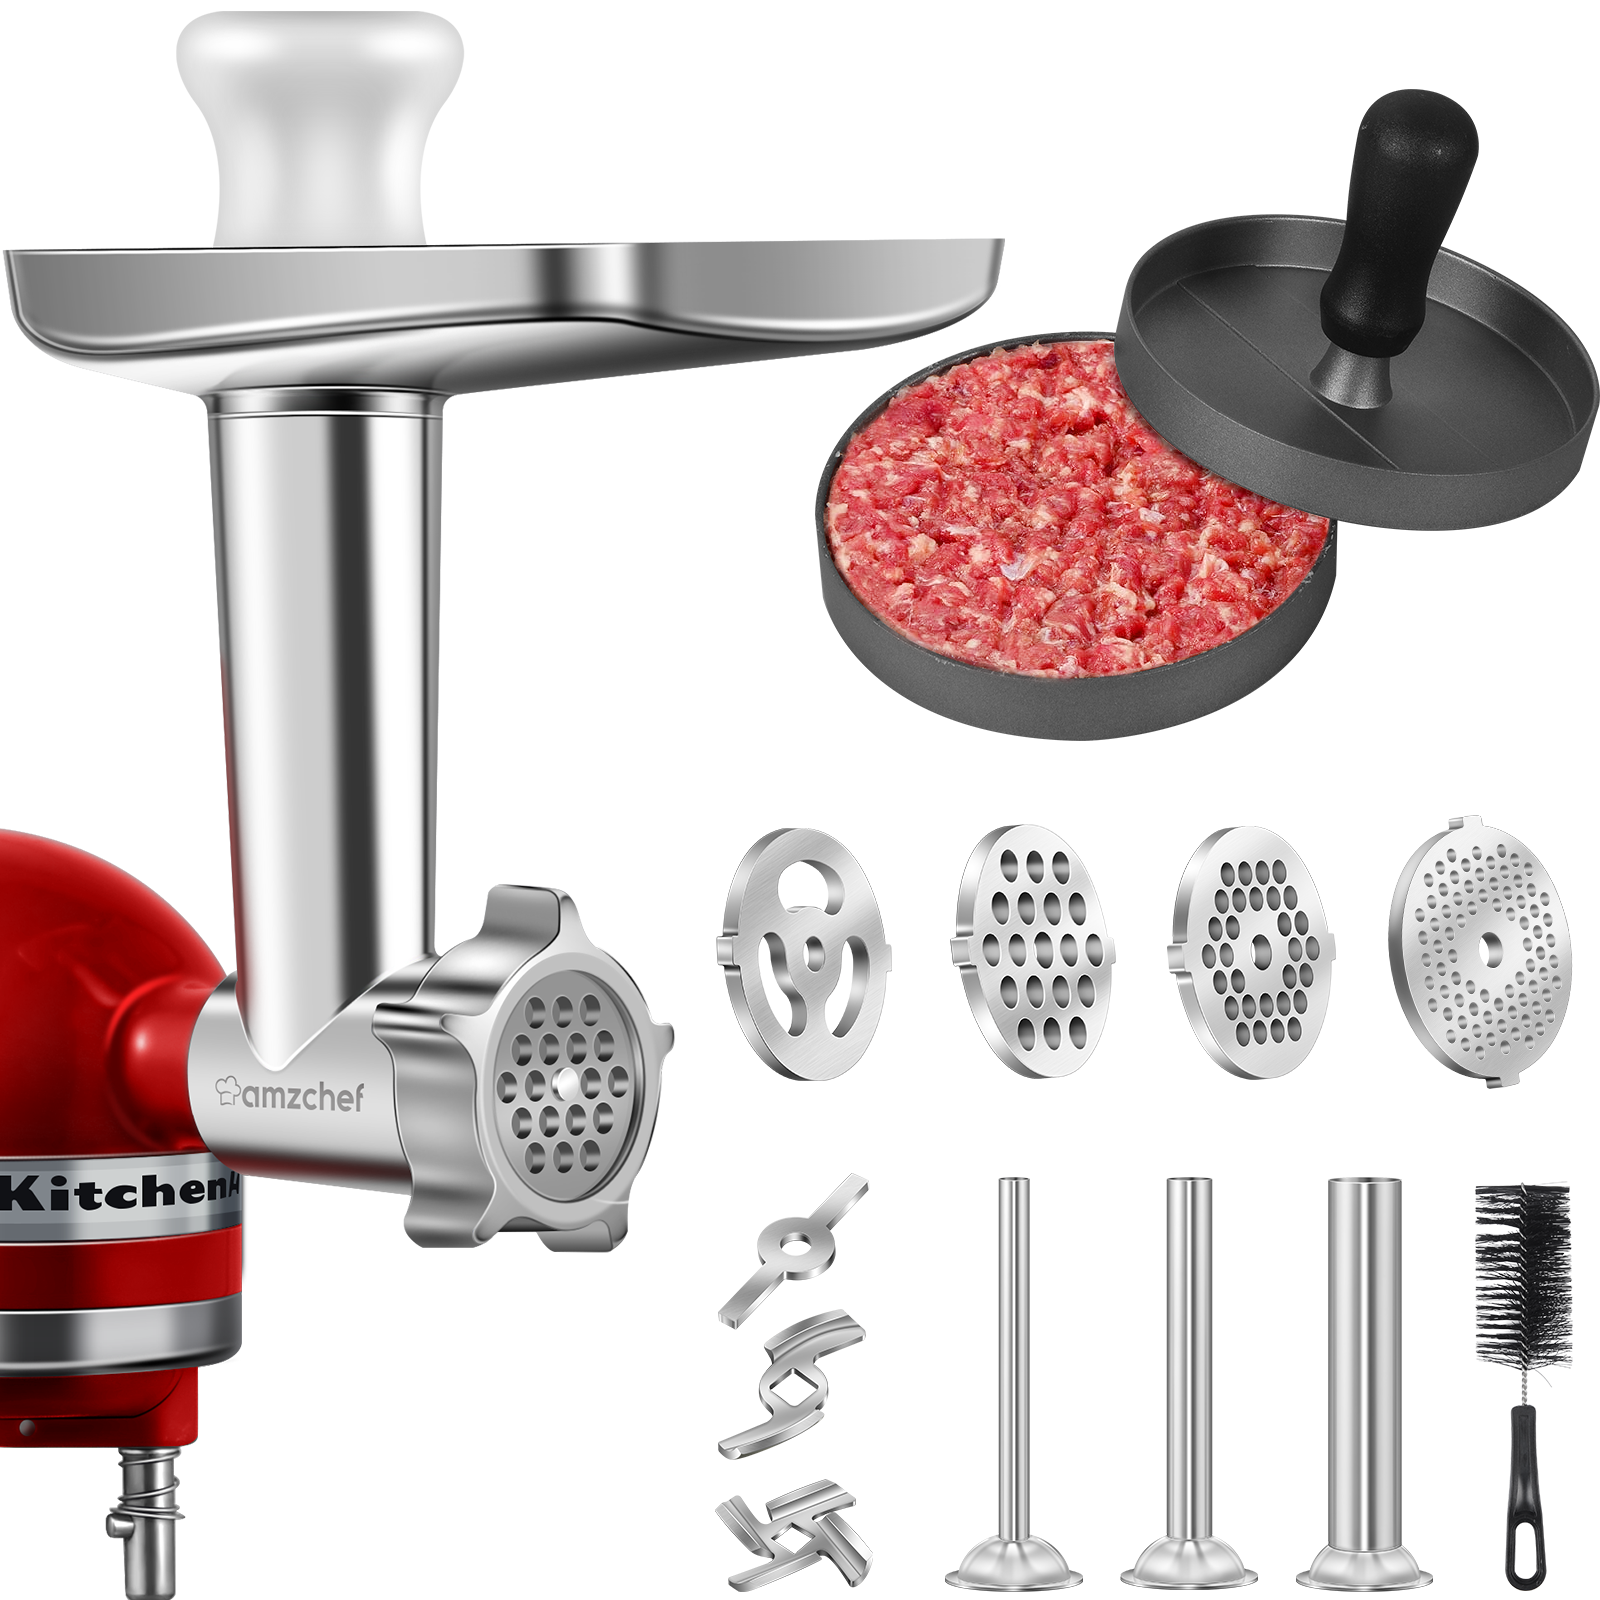 Metal Food Grinder Attachments For Kitchenaid Stand Mixers, Meat